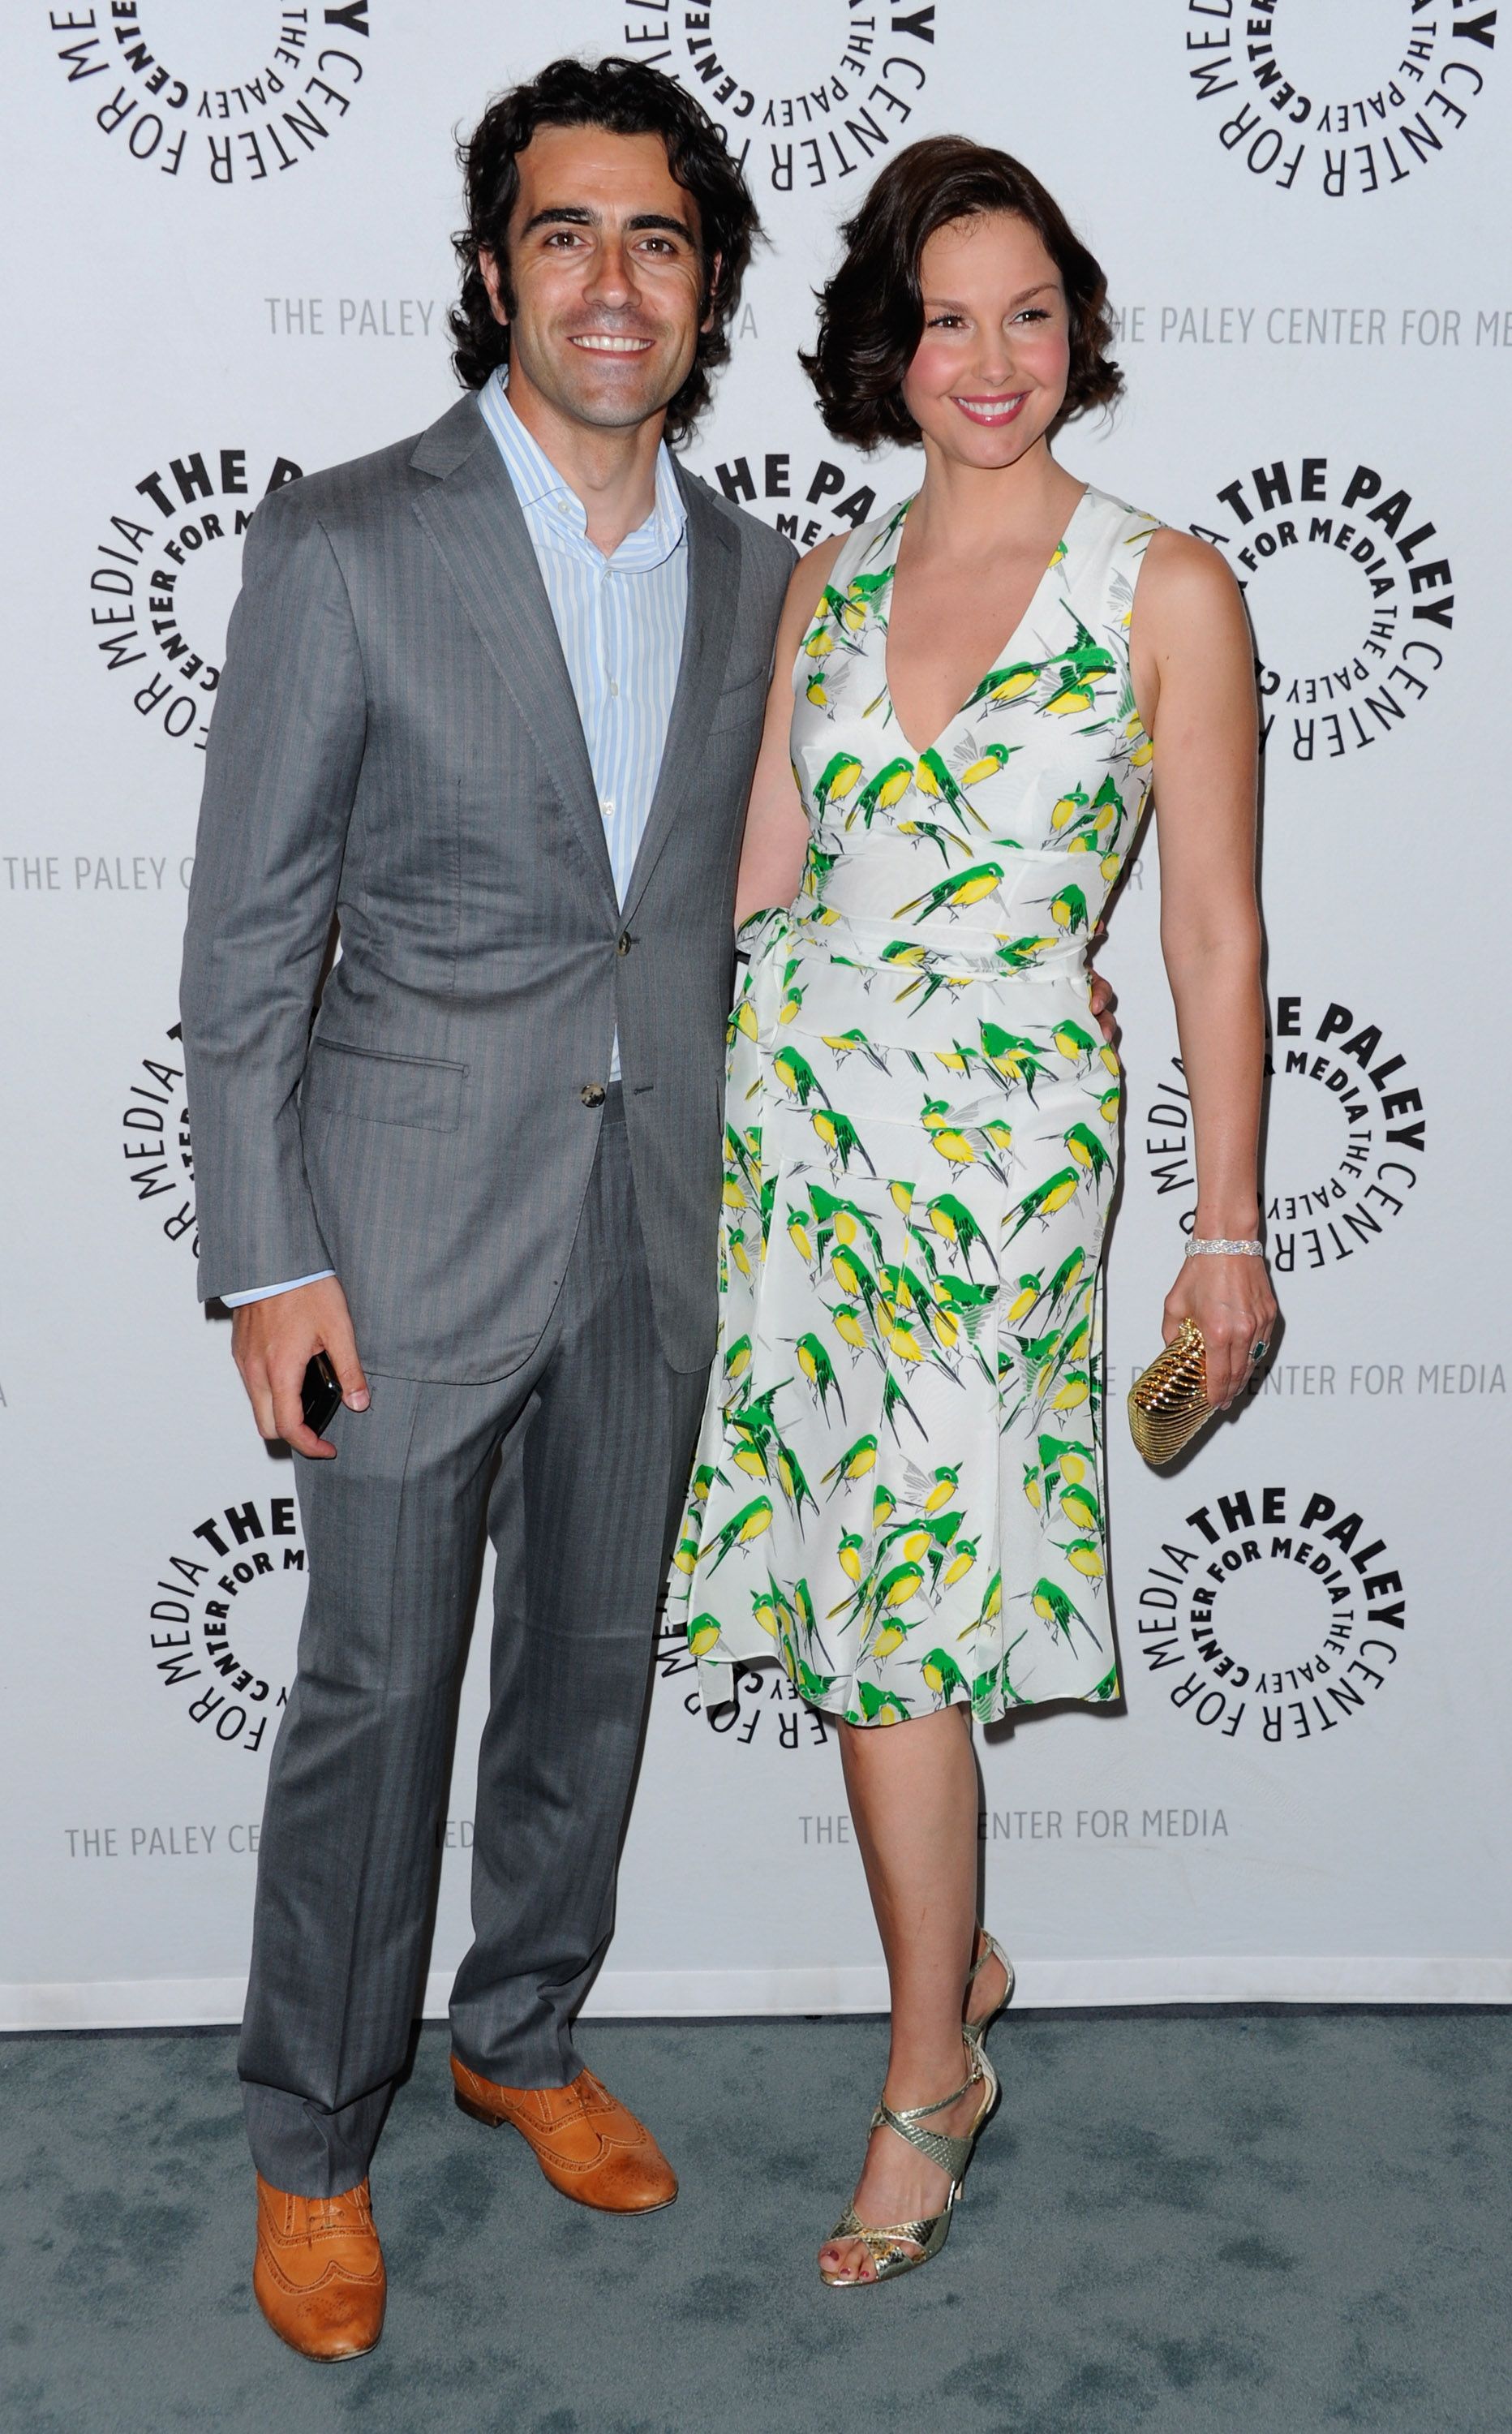 Dario Franchitti and Ashley Judd during The Paley Center for Media presents A Screening of ABC's "Missing" at The Paley Center for Media on April 10, 2012, in Beverly Hills, California. | Source: Getty Images